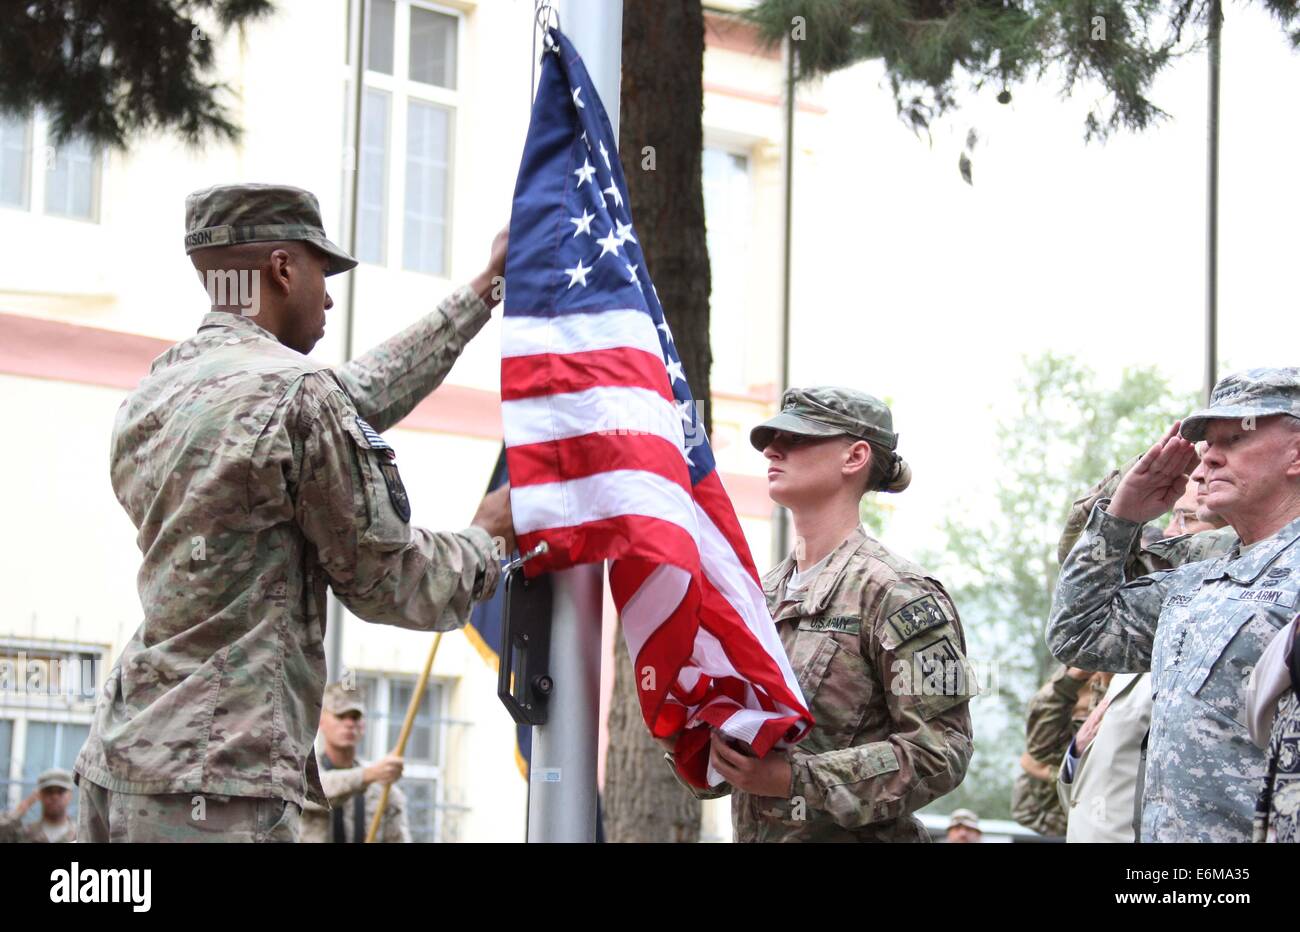 Kabul, Afghanistan. 26th Aug, 2014. U.S soldiers rise the U.S. flag during a change of command ceremony at the ISAF headquarters in Kabul, Afghanistan on August 26, 2014. U.S. Marine Corps General Joseph F. Dunford, Jr. on Tuesday handed over the command of U.S. and NATO forces stationed in Afghanistan to his successor U.S. Army General James F. Campbell. Credit:  Xinhua/Alamy Live News Stock Photo